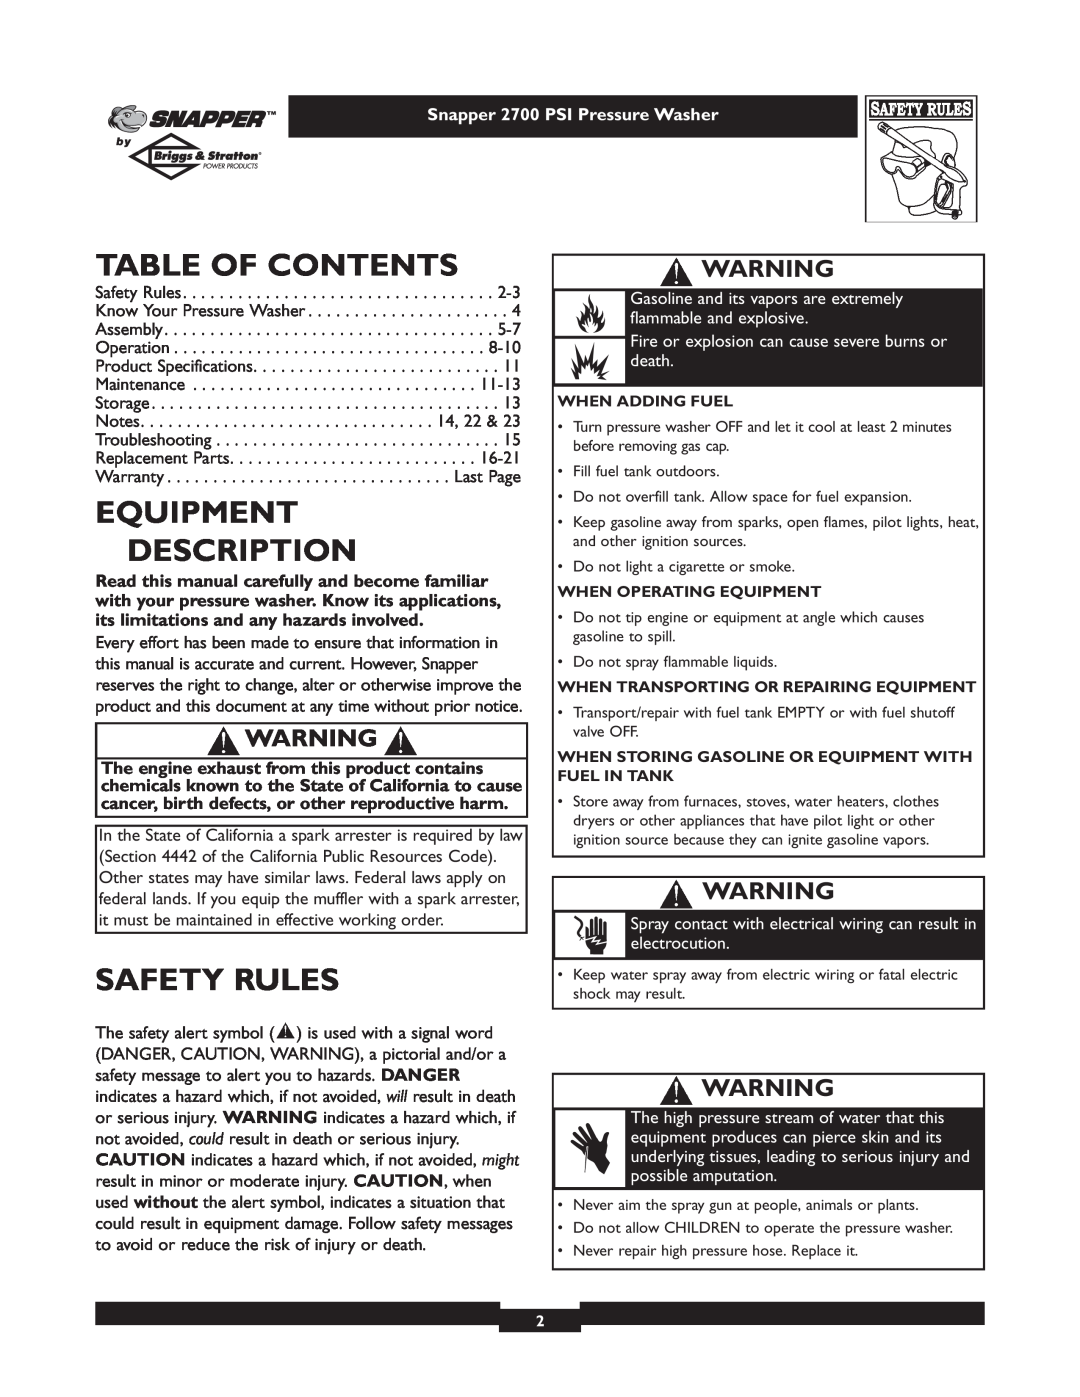 Briggs & Stratton 2700PSI Table Of Contents, Equipment Description, Safety Rules, Snapper 2700 PSI Pressure Washer 